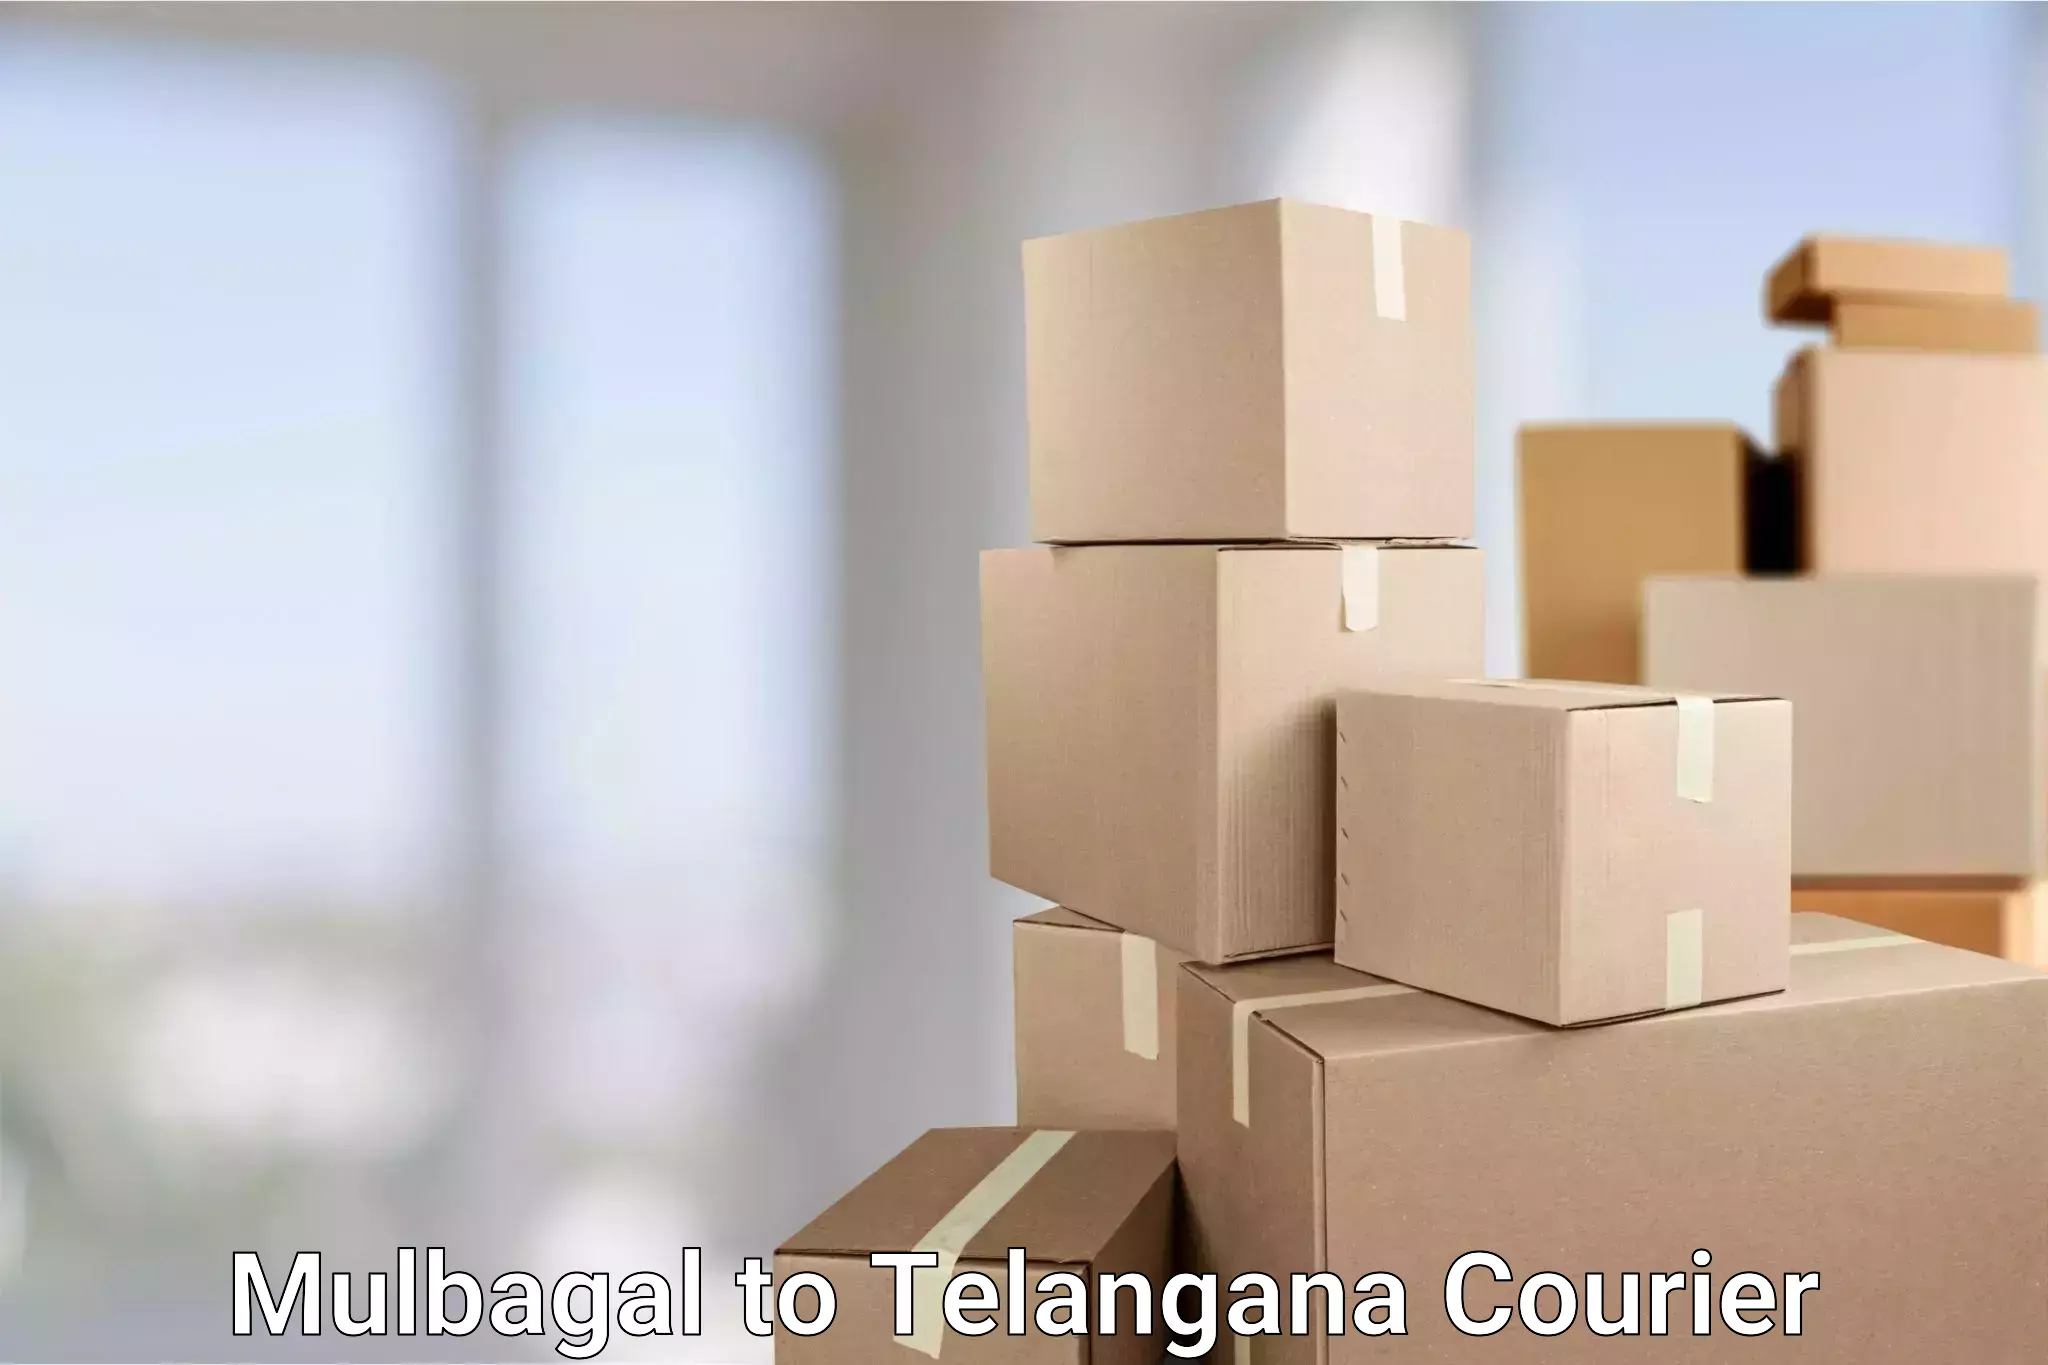 Custom courier packaging in Mulbagal to Kamalapur